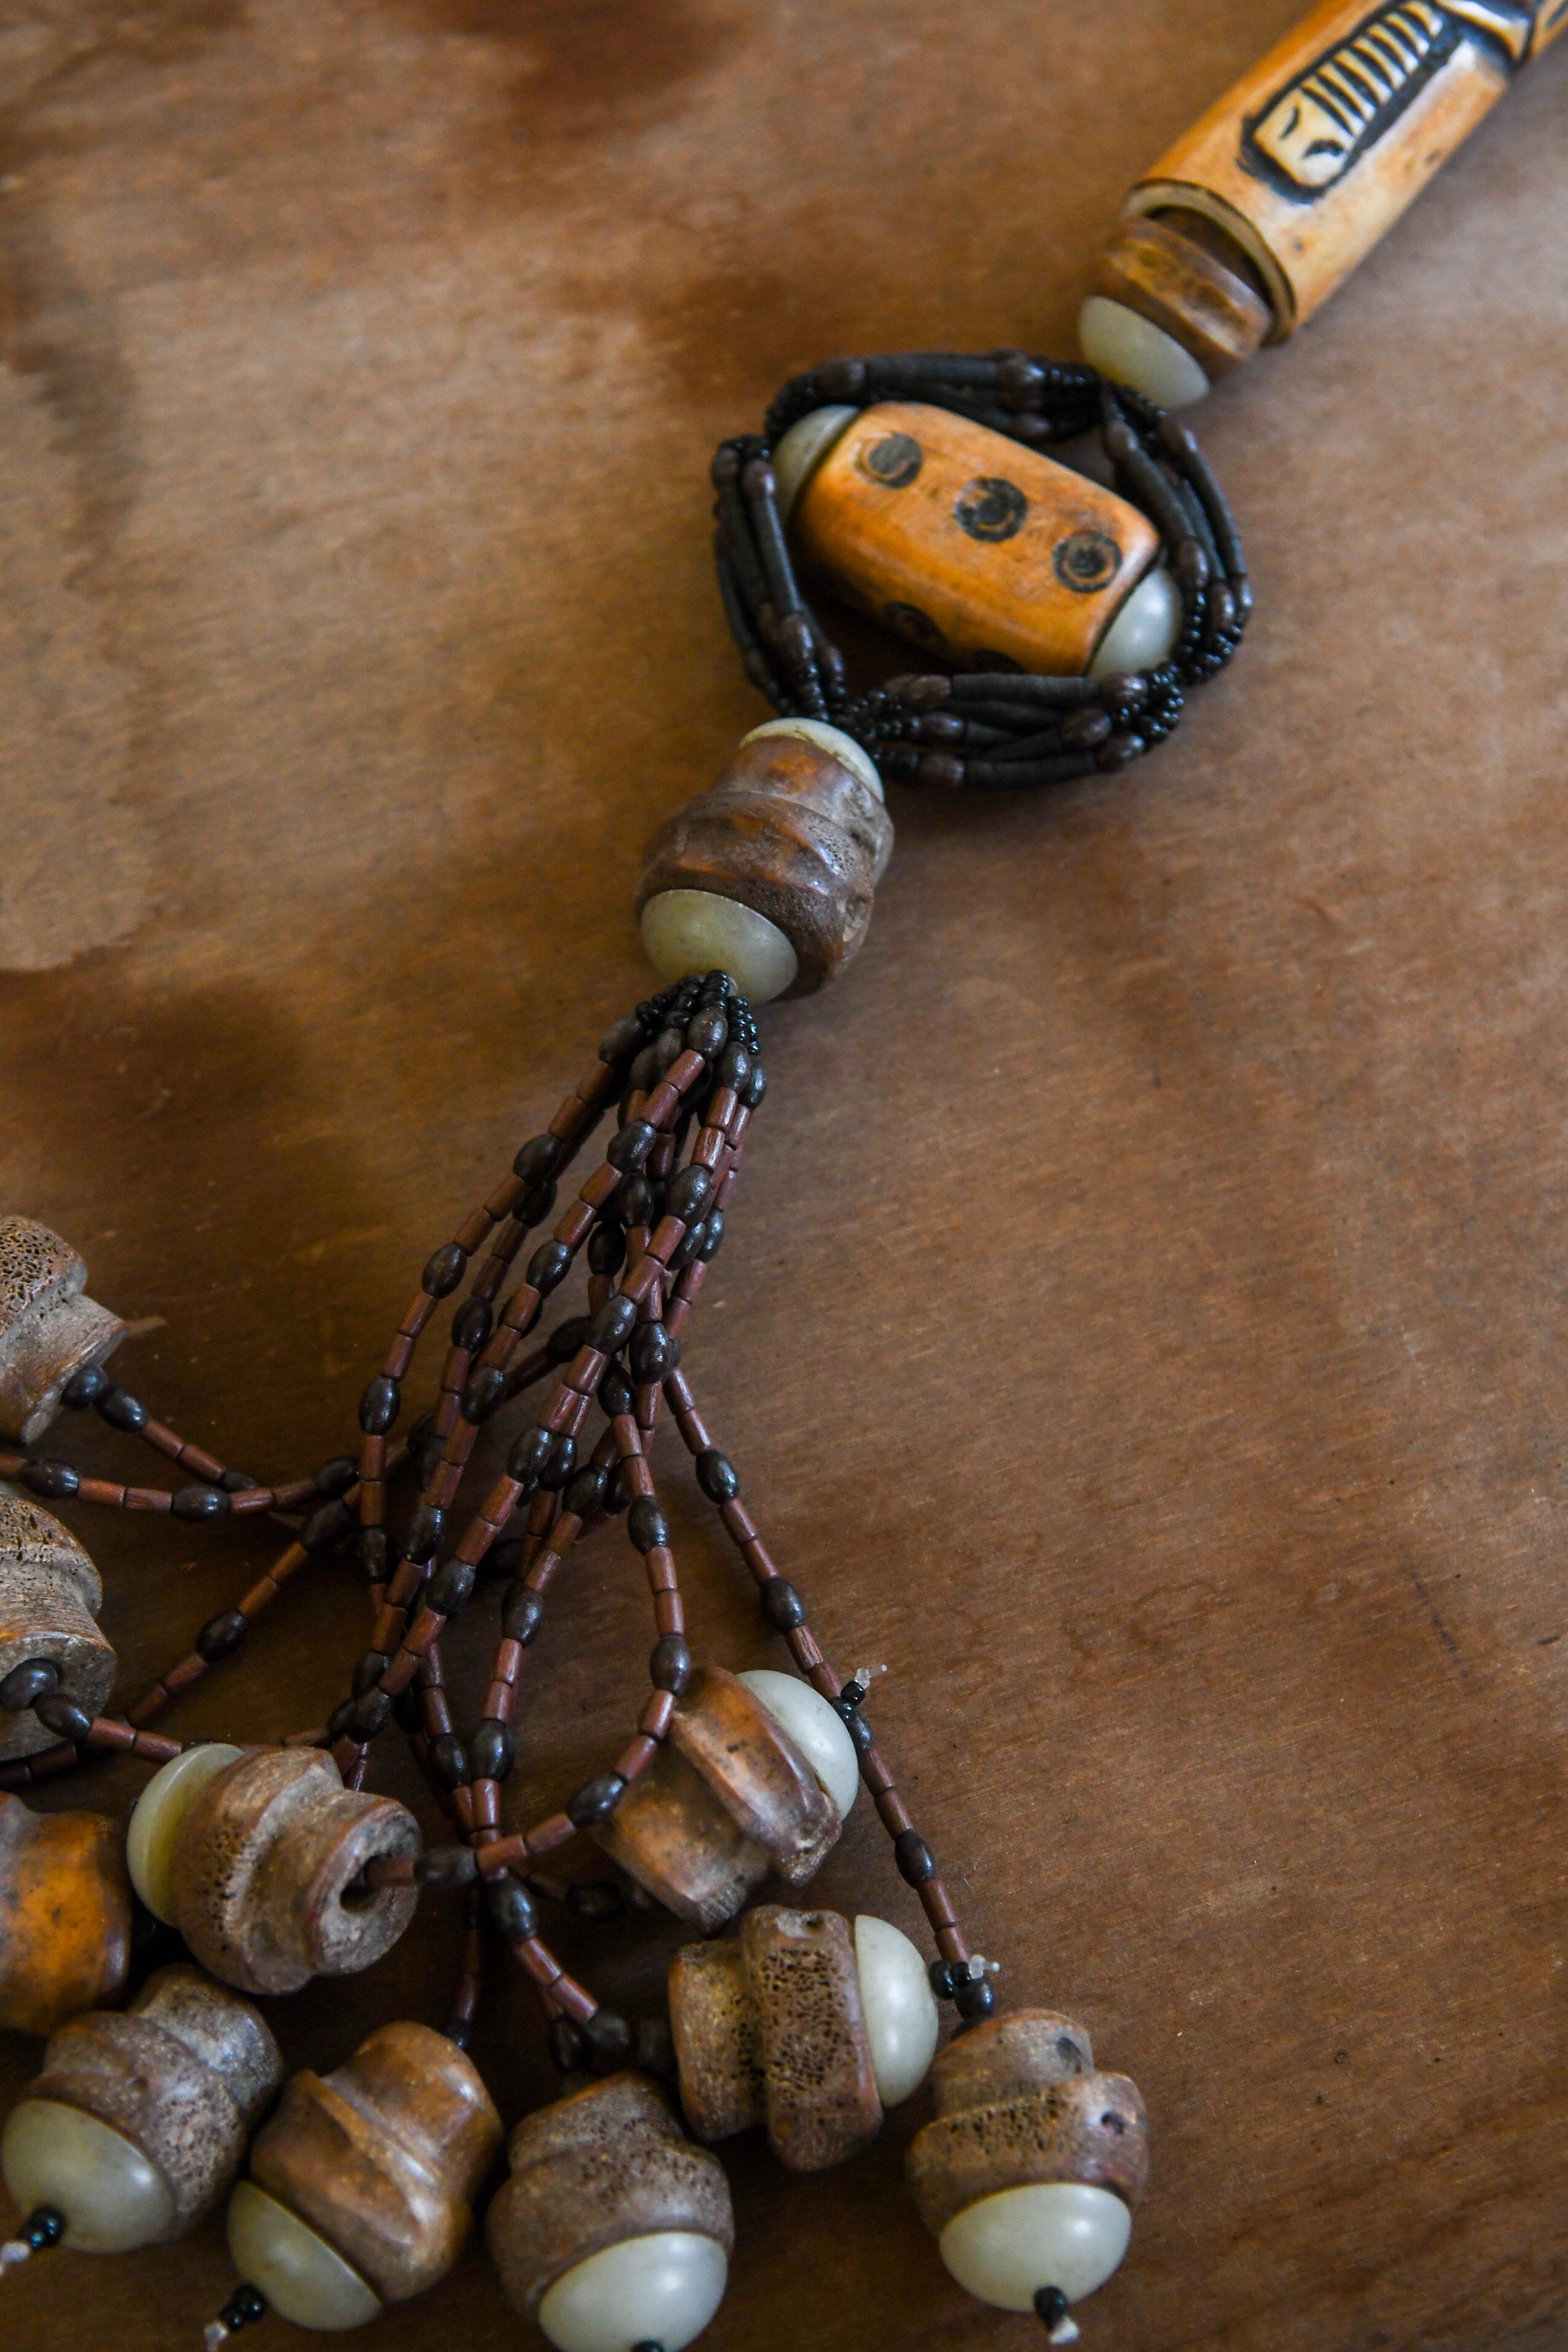 Tribal Necklaces - Handmade - African Art - Jewelry - Traditional - African Necklaces - Beaded - Collectible Necklaces - This huge and rare tribal necklace features Carved Bone African Art and is great for home decorations and collections. It stands out with its bold design and intricate detail. Length: 33 inches